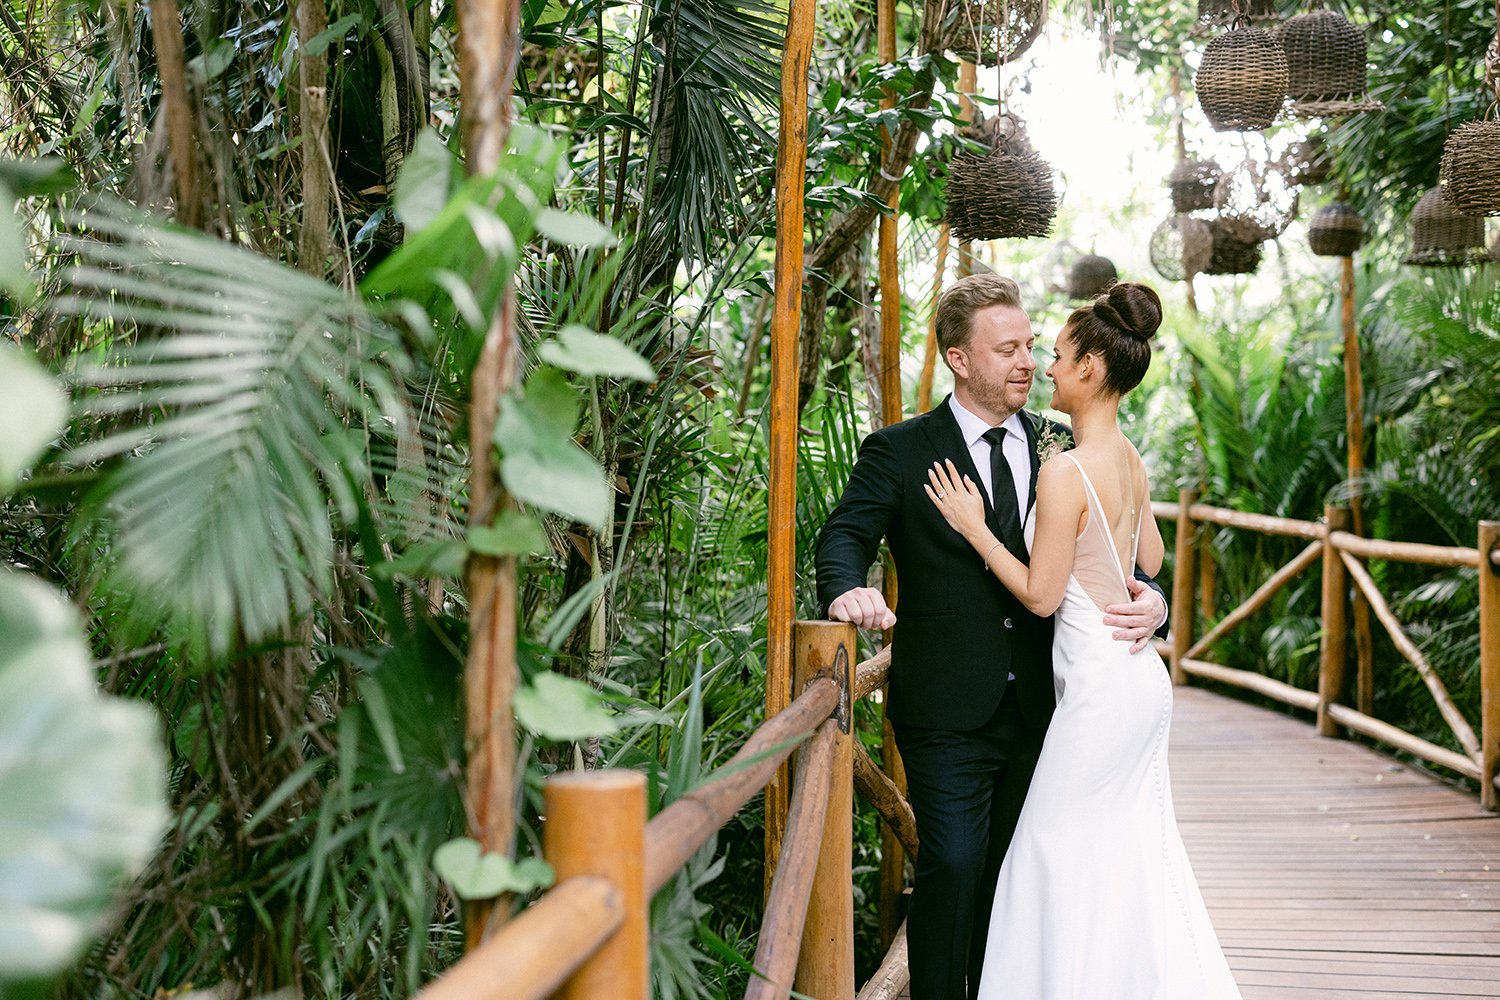 13 bride and groom smiling looking at each other hugging before their first look surrounded by green tropical plants at Rosewood Mayakoba Riviera Maya Cancun Mexico.JPG